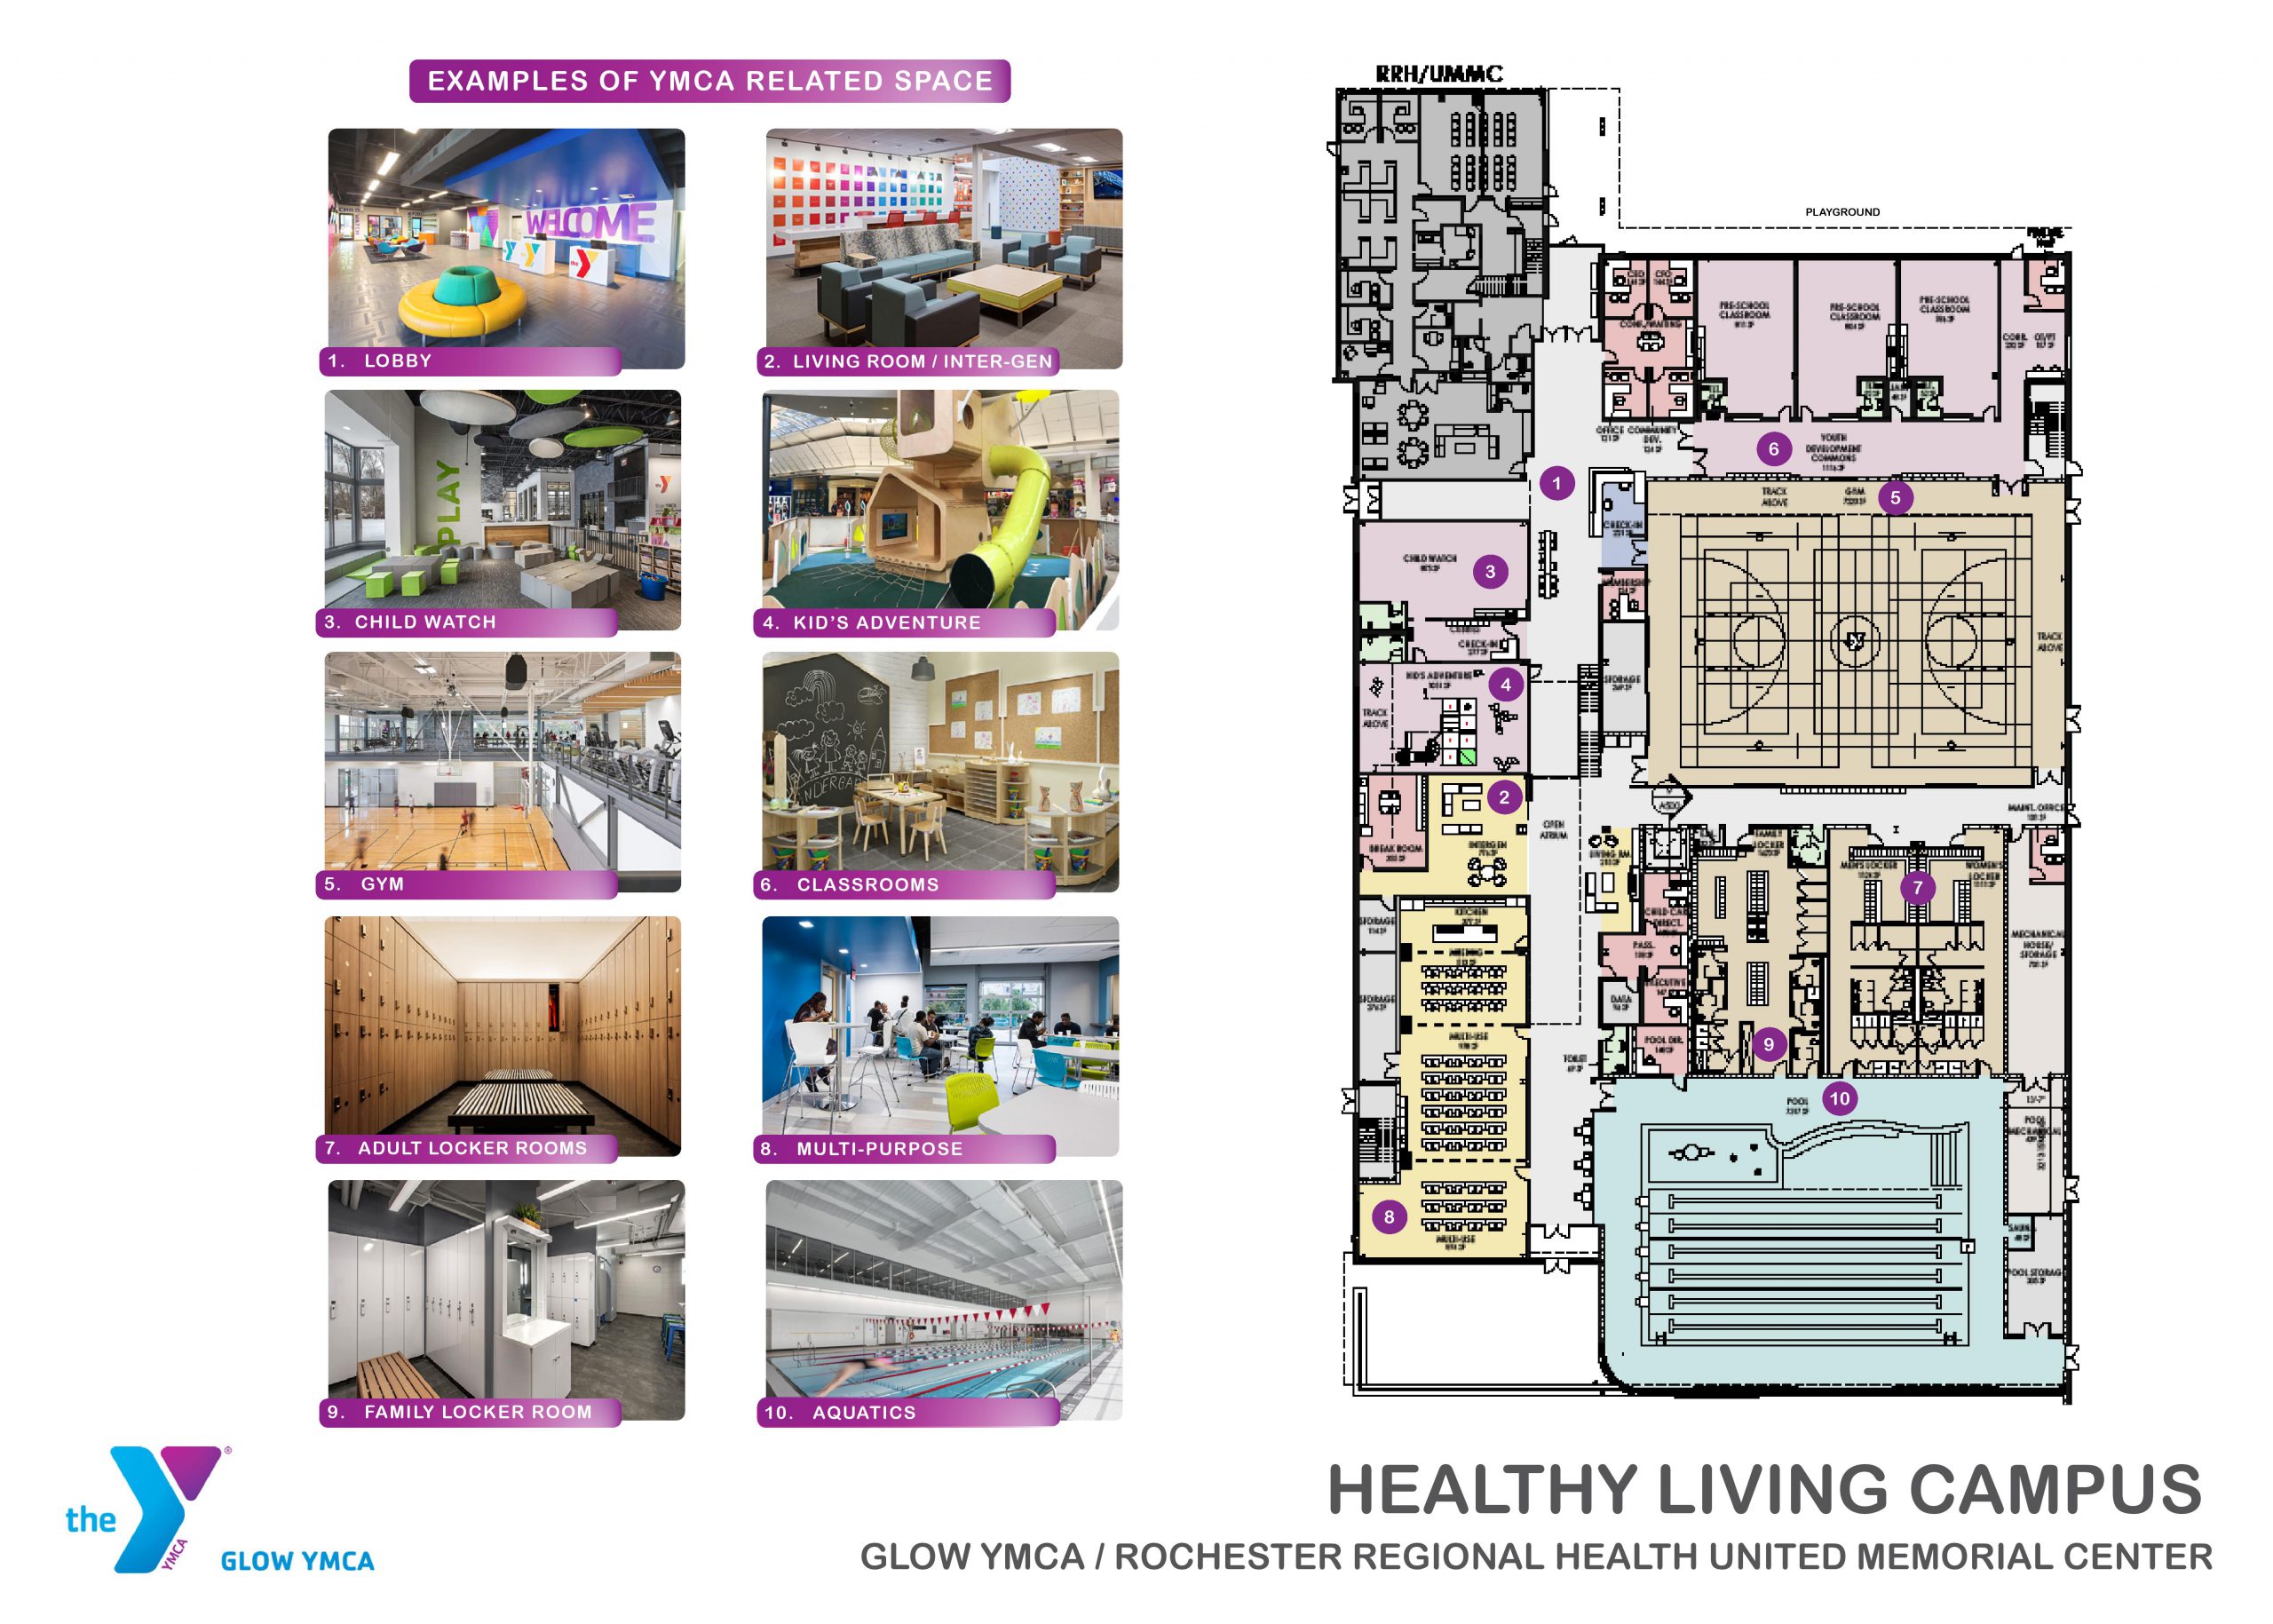 Image depicts the floor plan of the new YMCA alongside simulated photographs of new spaces. The floor plan would be too long to detail everything, but the primary differences between the new Y and old Y designs are: There is a large parking lot right next to the entrance. The Youth Development Commons is near the entrance. Child Watch is on the first floor. There is a two-story adventure room for children. There are family and accessible locker rooms. The gymnasium is larger and regulation-sized. There is a teaching kitchen. There is an intergenerational multi-purpose room. The swimming pool has a splash pad and wading pool. The upstairs has an indoor track. The outdoor playground will be accessible to members. There is a space used by Rochester Regional UMMC.